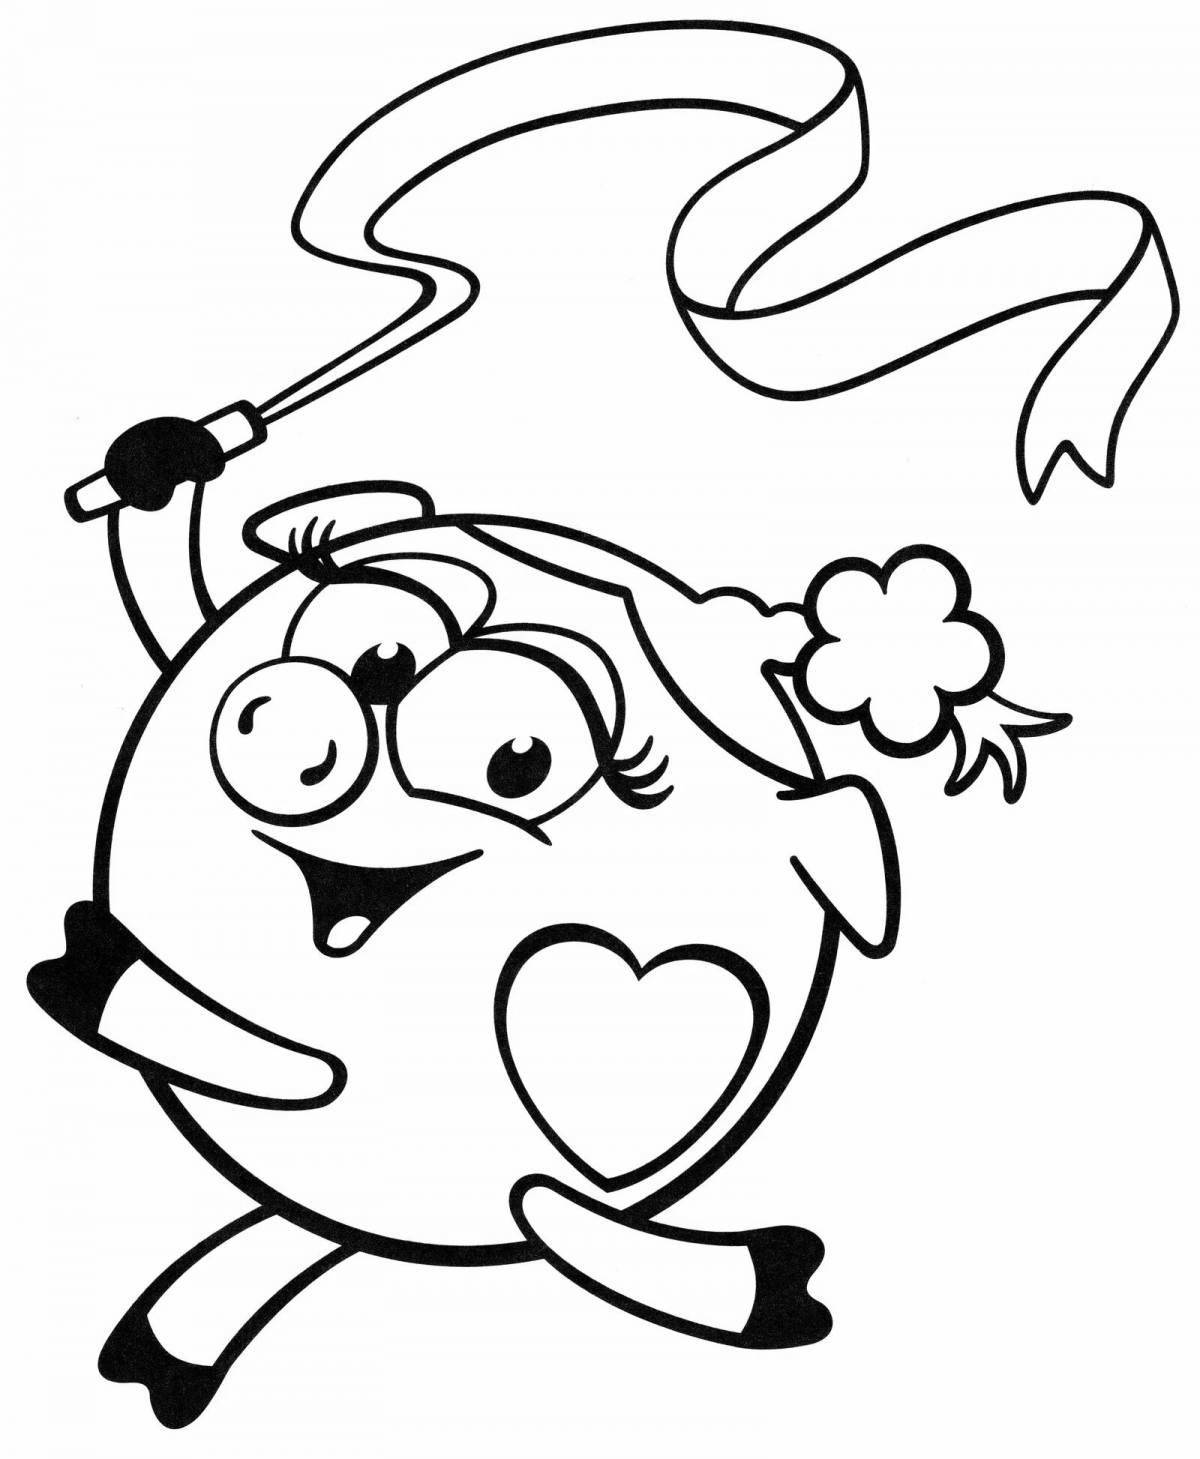 Chrum Charming Coloring Page